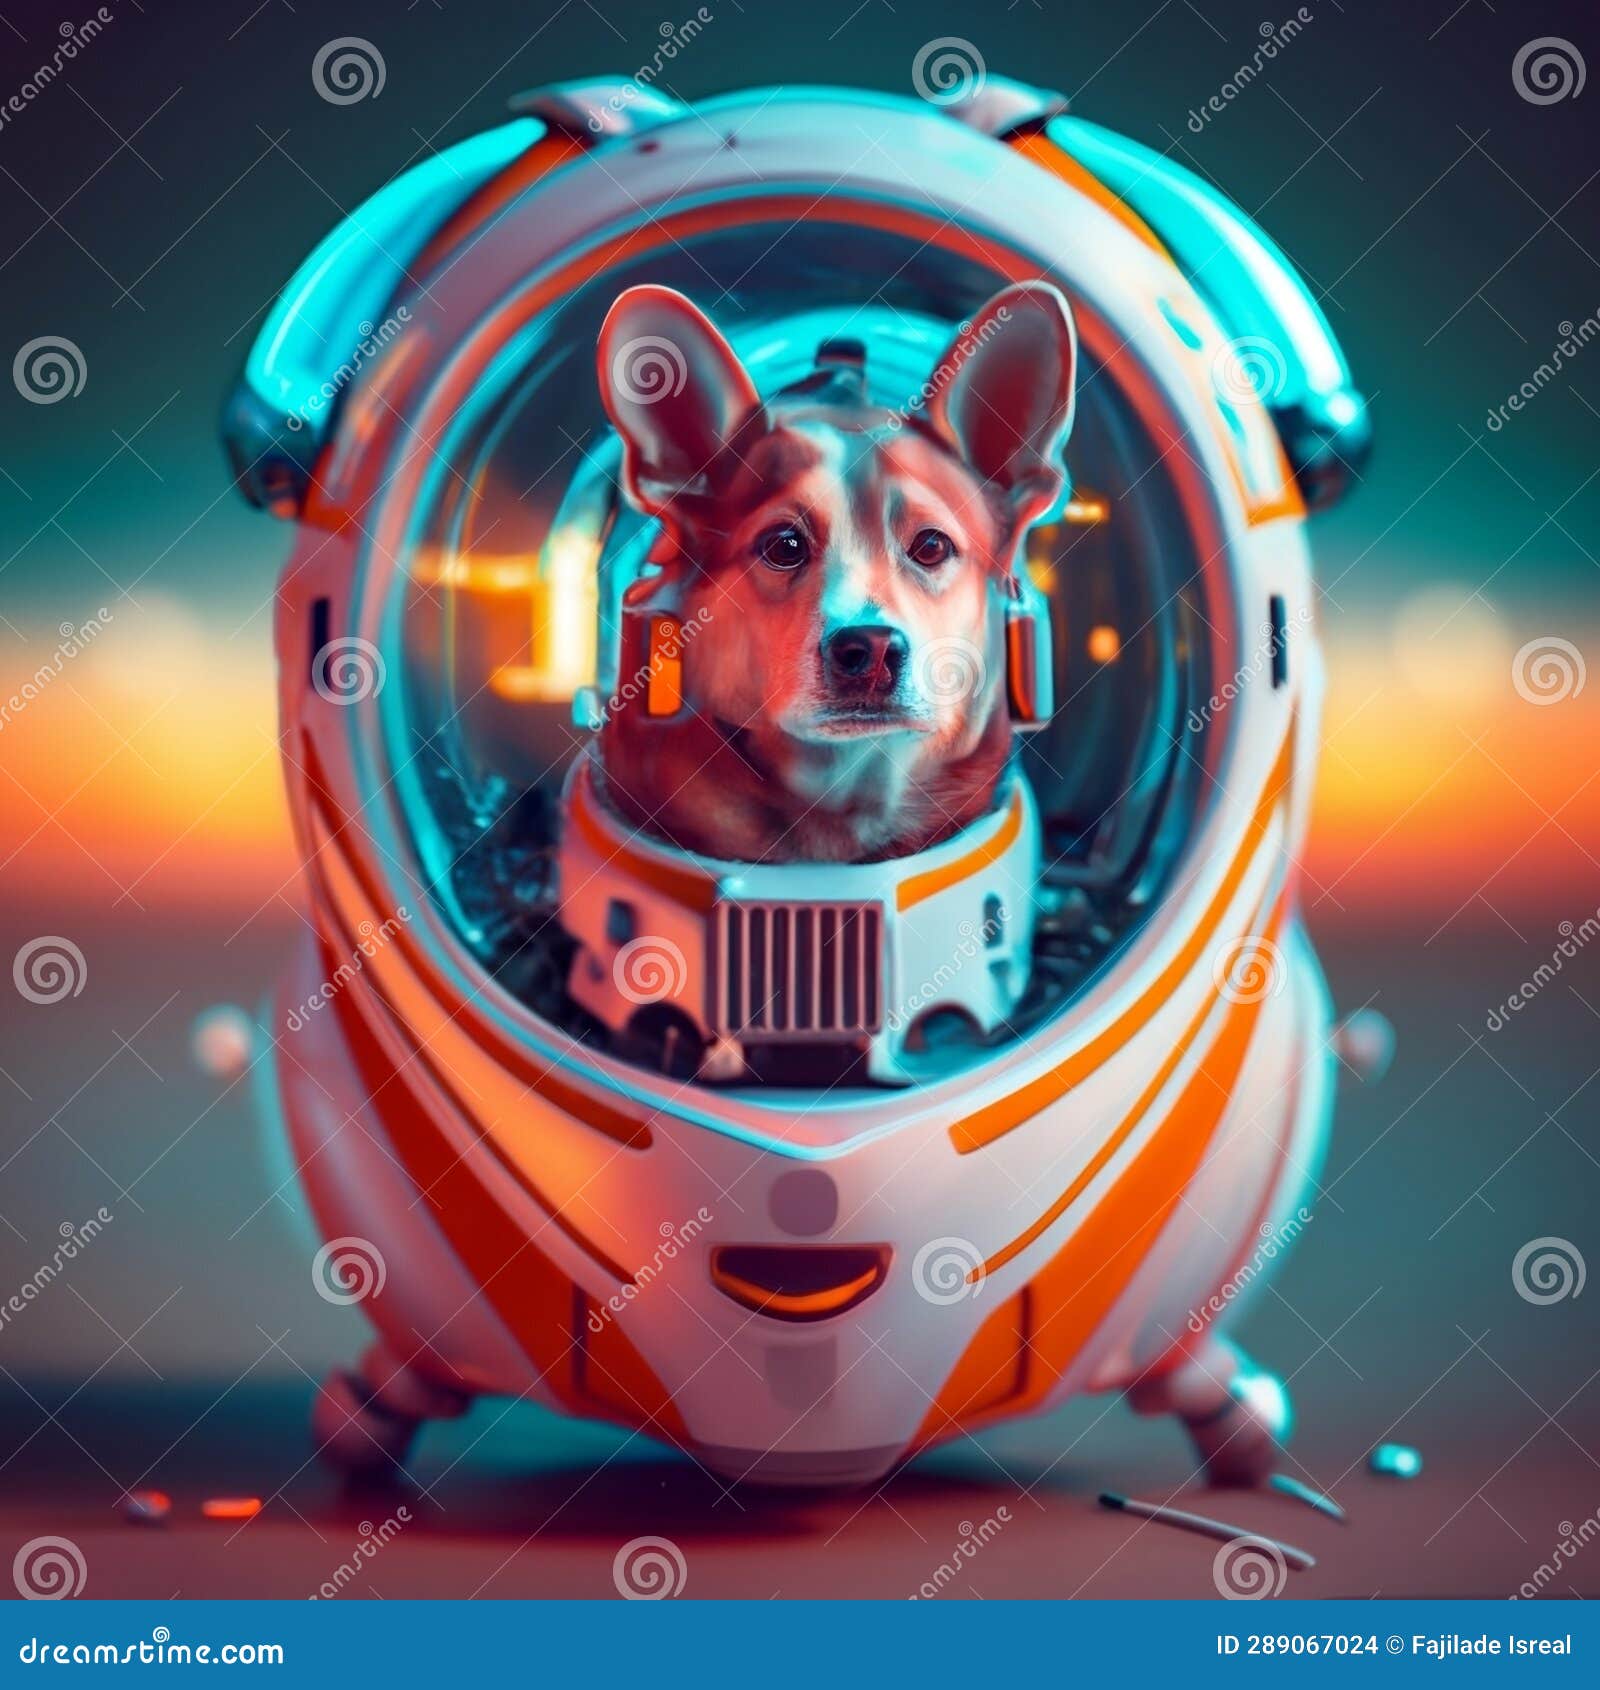 A dog in space ship stock illustration. Illustration of space - 289067024